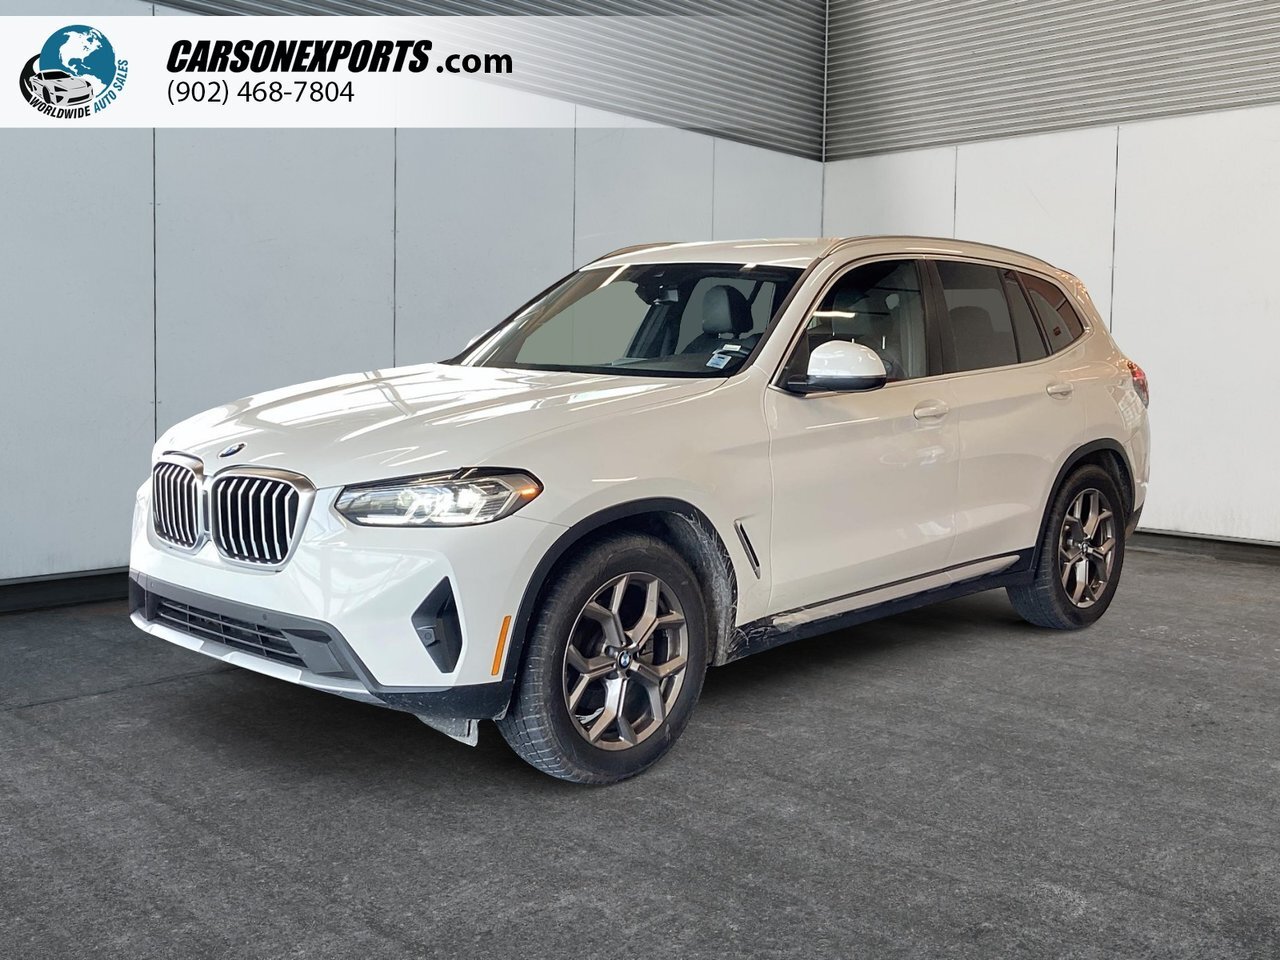 2022 BMW X3 XDrive30i The best place to buy a used car. Period